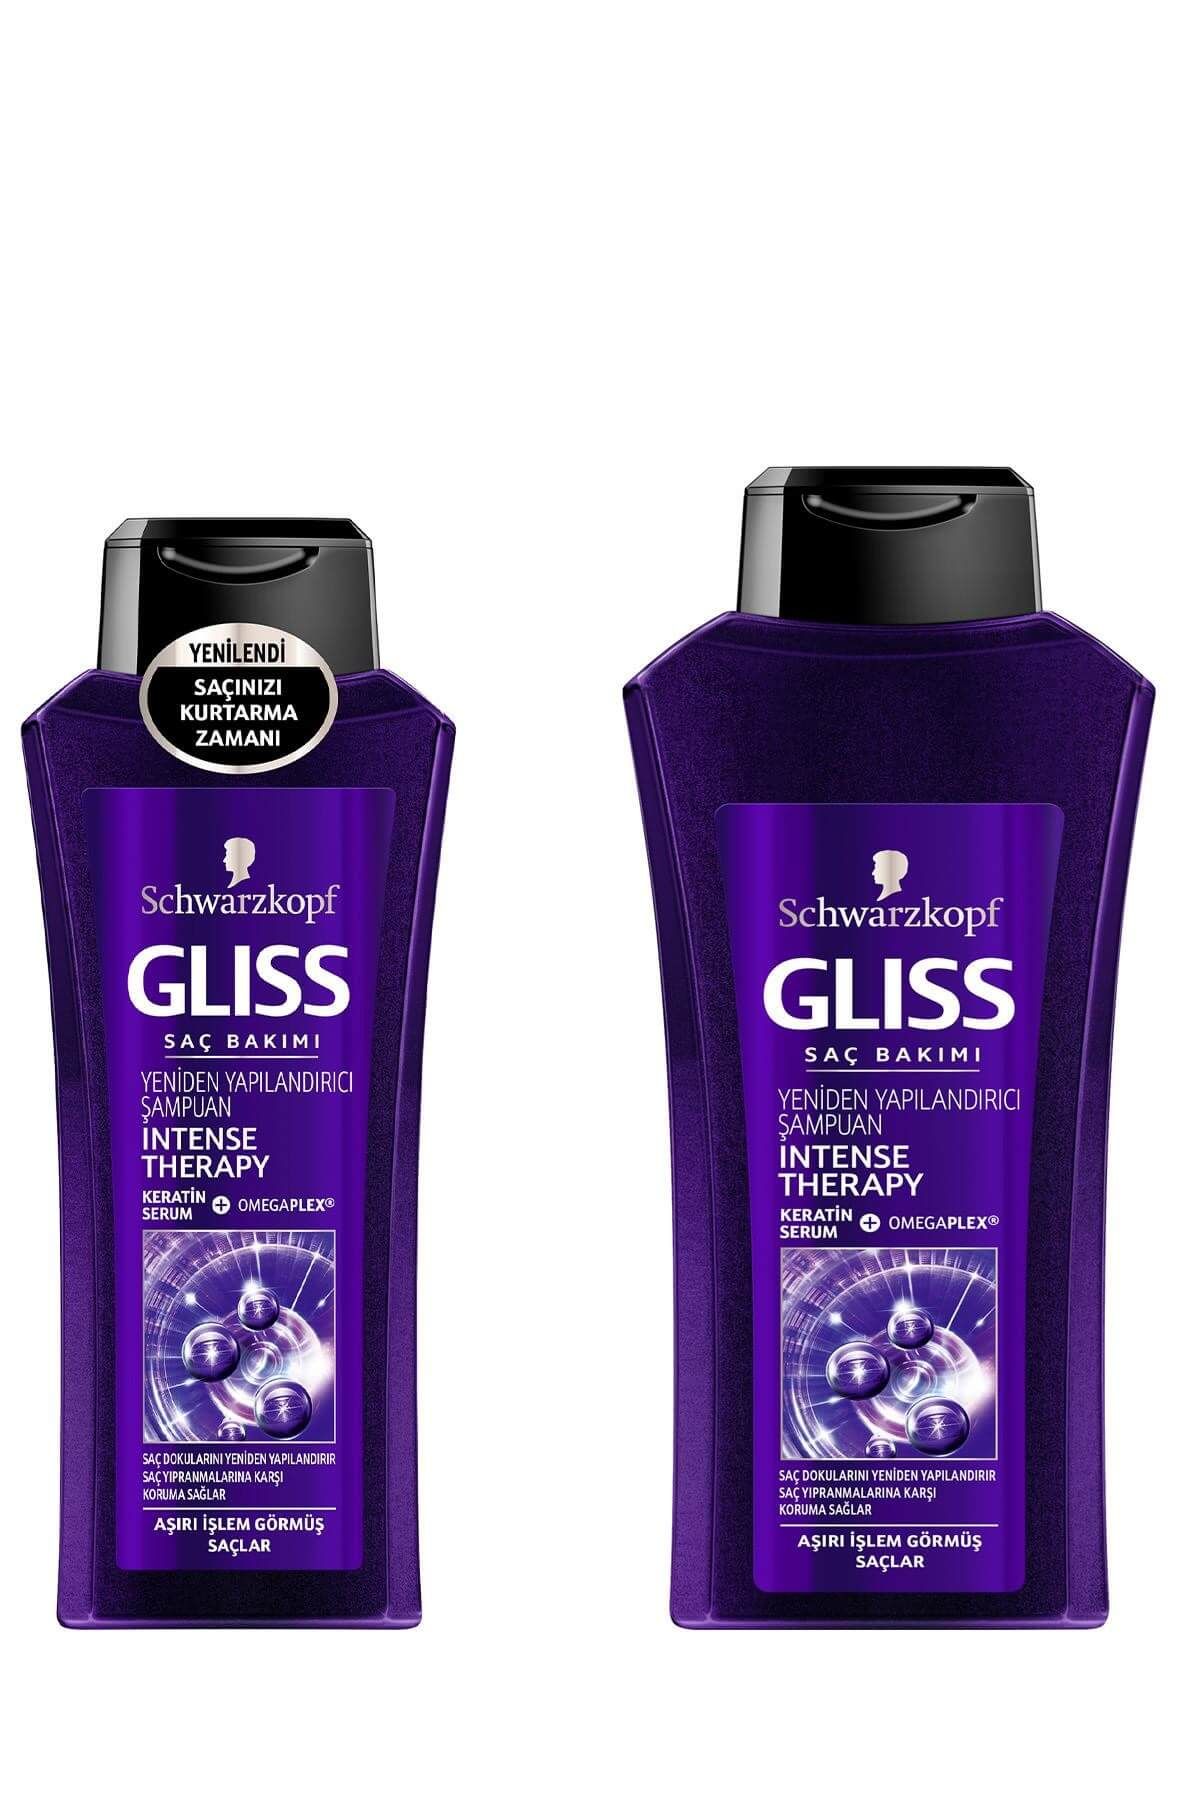 Gliss Intense Theraphy Şampuan 525 ml  +Intense Theraphy Şampuan 360 ml